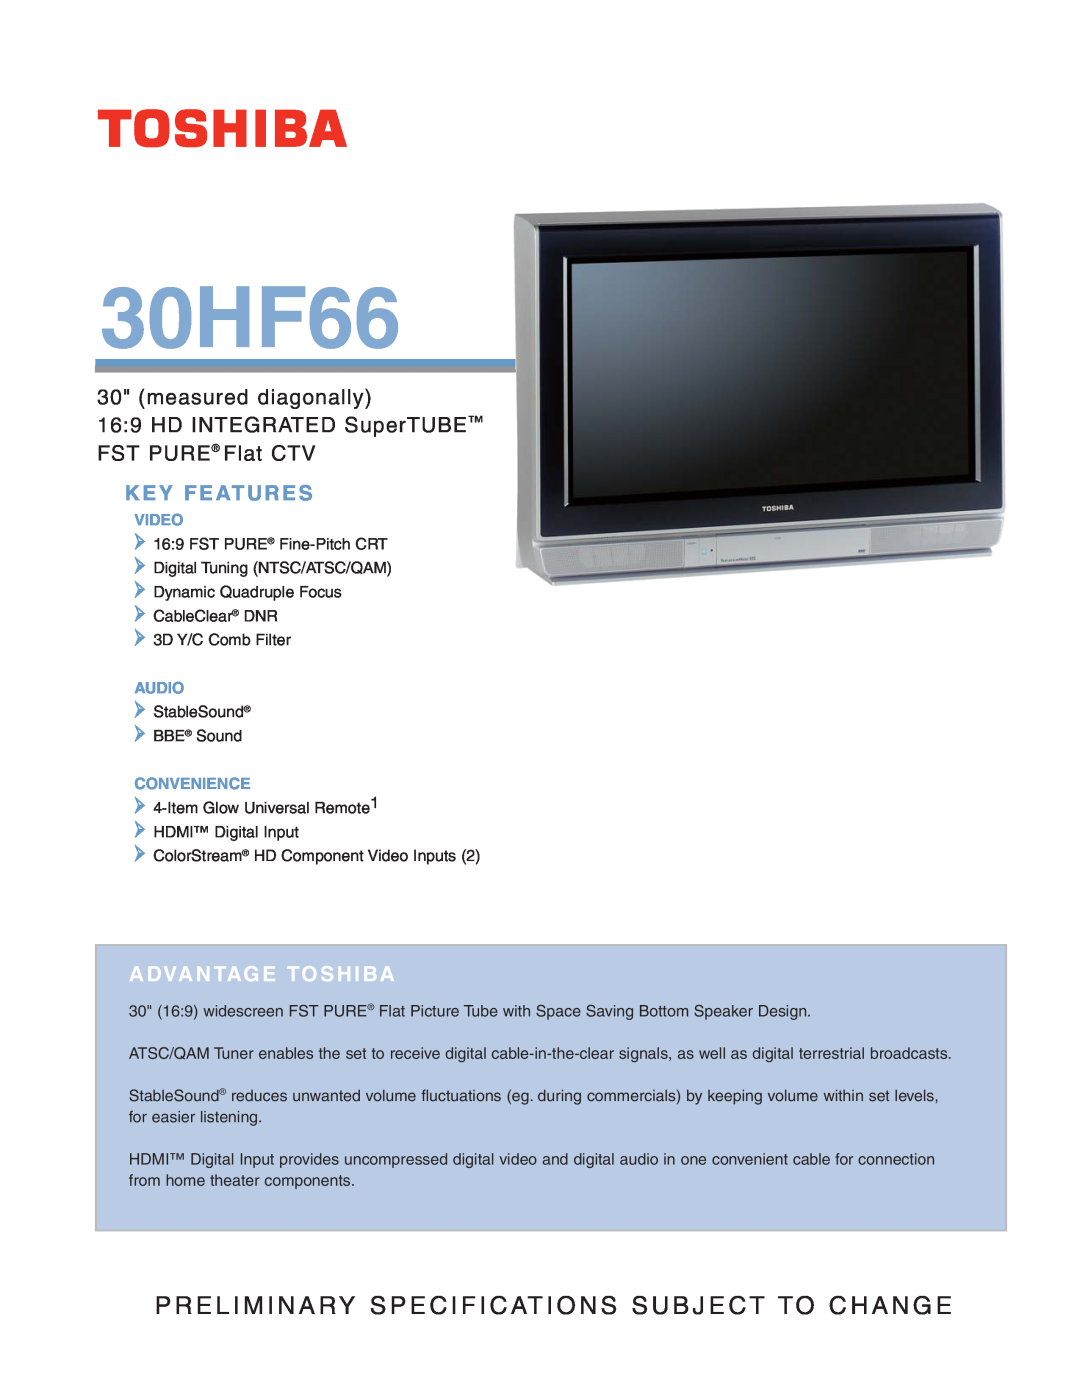 Toshiba 30HF66 specifications Key Features, measured diagonally 169 HD INTEGRATED SuperTUBE FST PURE Flat CTV, Video 